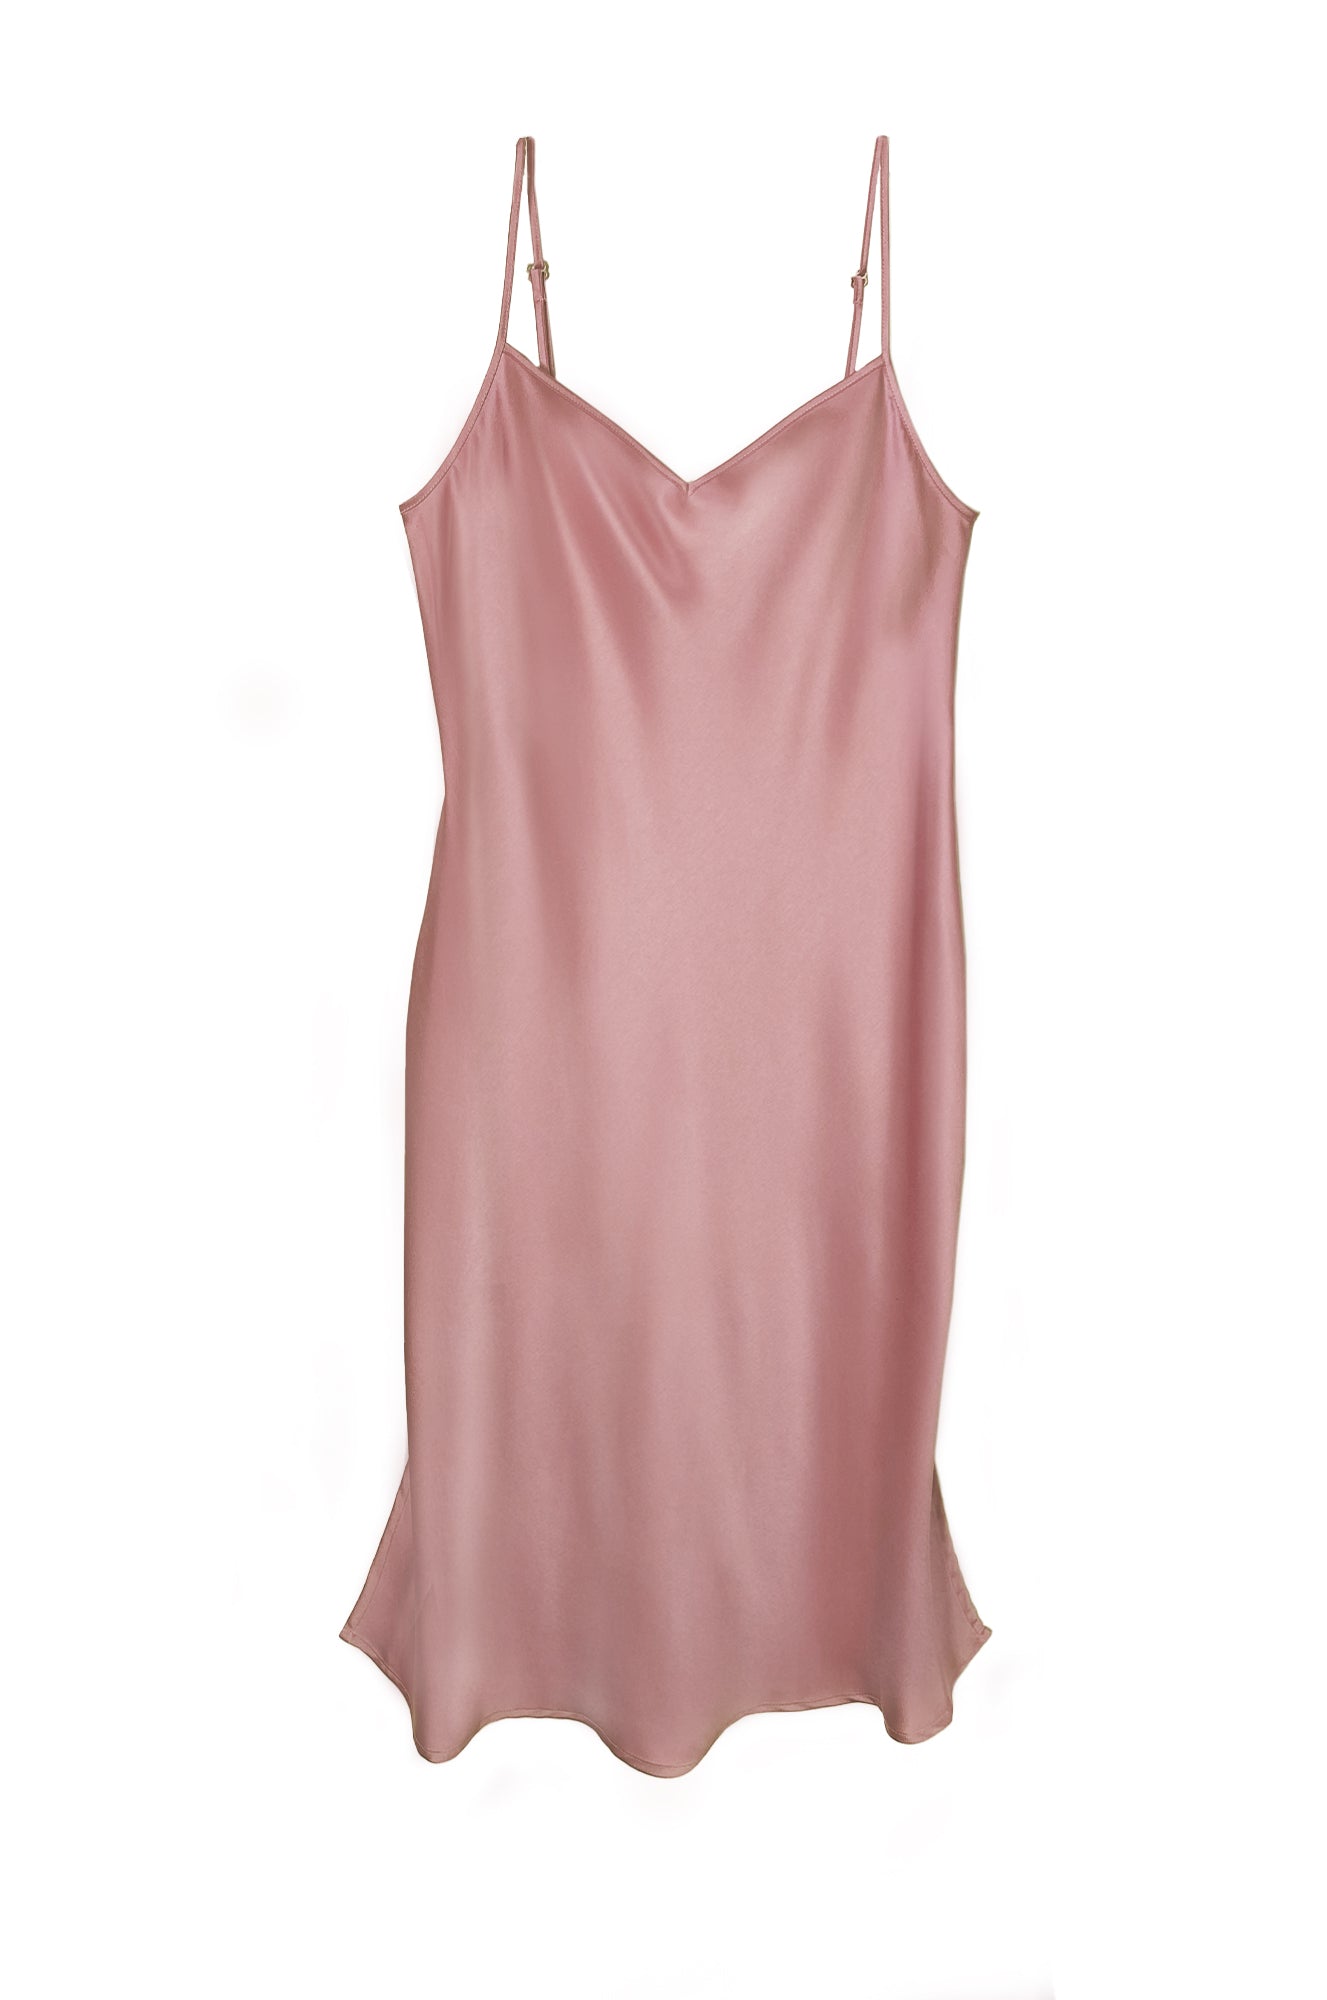 Bias cut slip dress.  Fit to perfection, the double ply crepe back satin with a v-neckline, adjustable straps, and side slits, that flows over your curves, but never clings. This style and color is a limited run. Designed for "The True Majority" sizes 10-22 by BAACAL Cynthia Vincent.